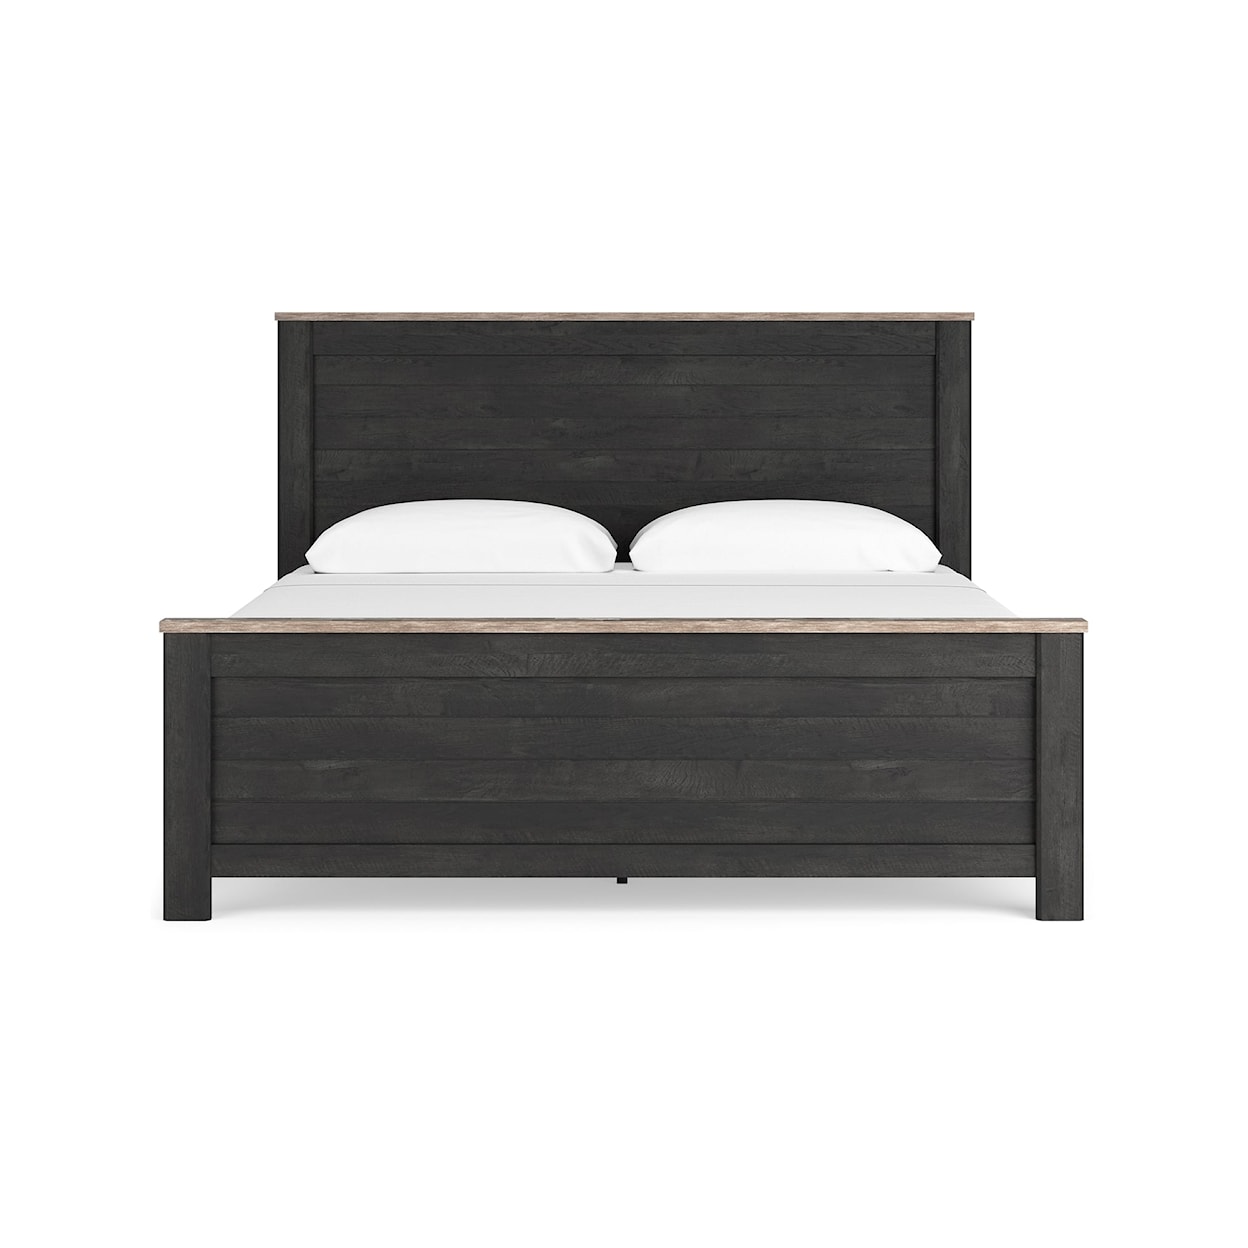 Signature Design by Ashley Nanforth King Panel Bed